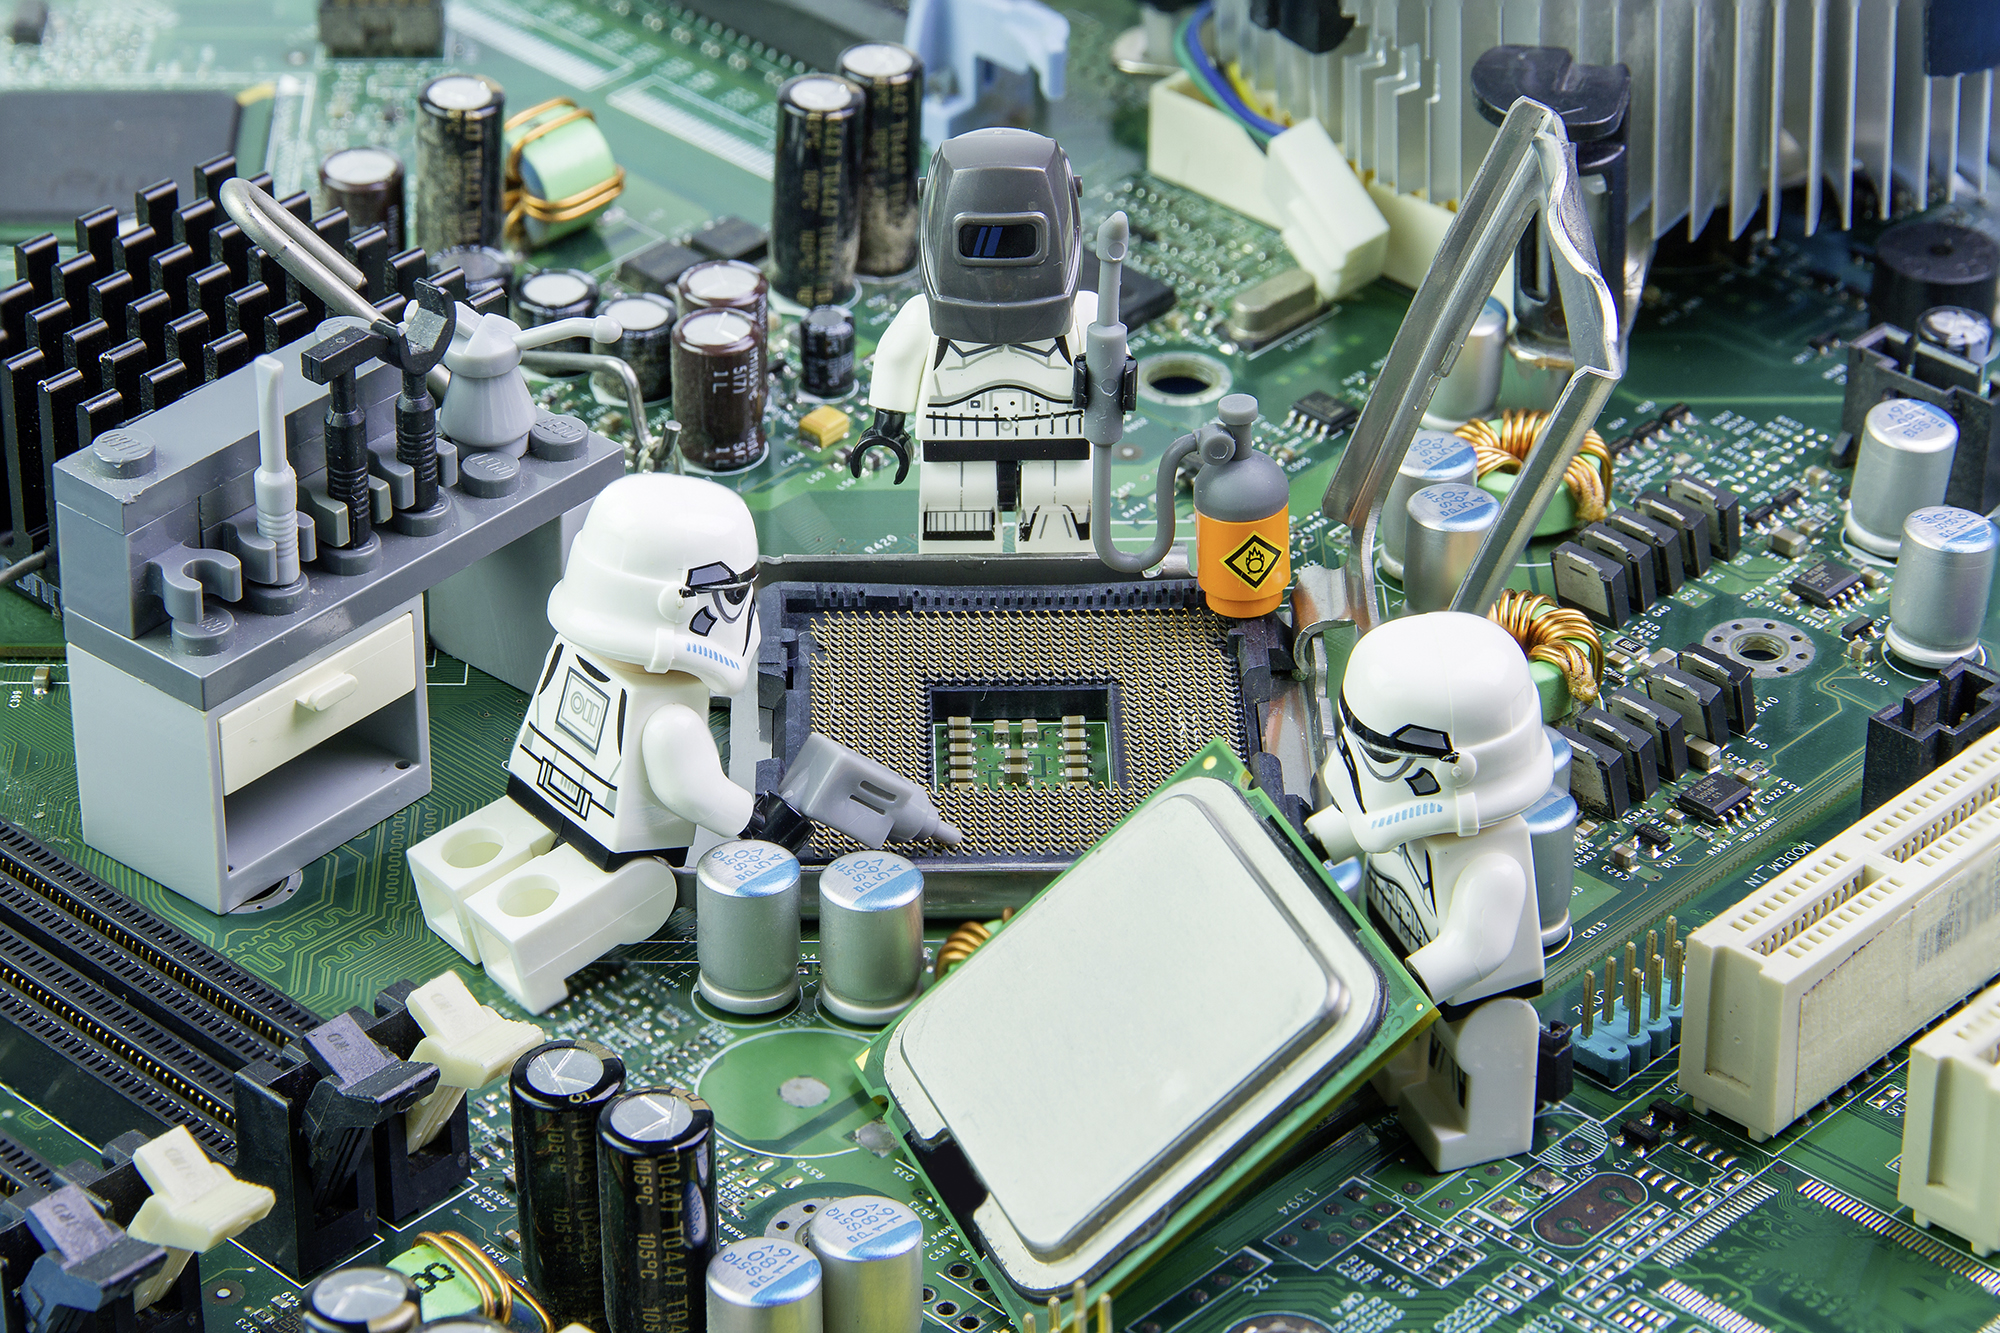 Nonthabure, Thailand - August 2, 2016: Lego star wars repairing computer motherboard.The lego Star Wars mini figures from movie series.Lego is an interlocking brick system collected around the world.